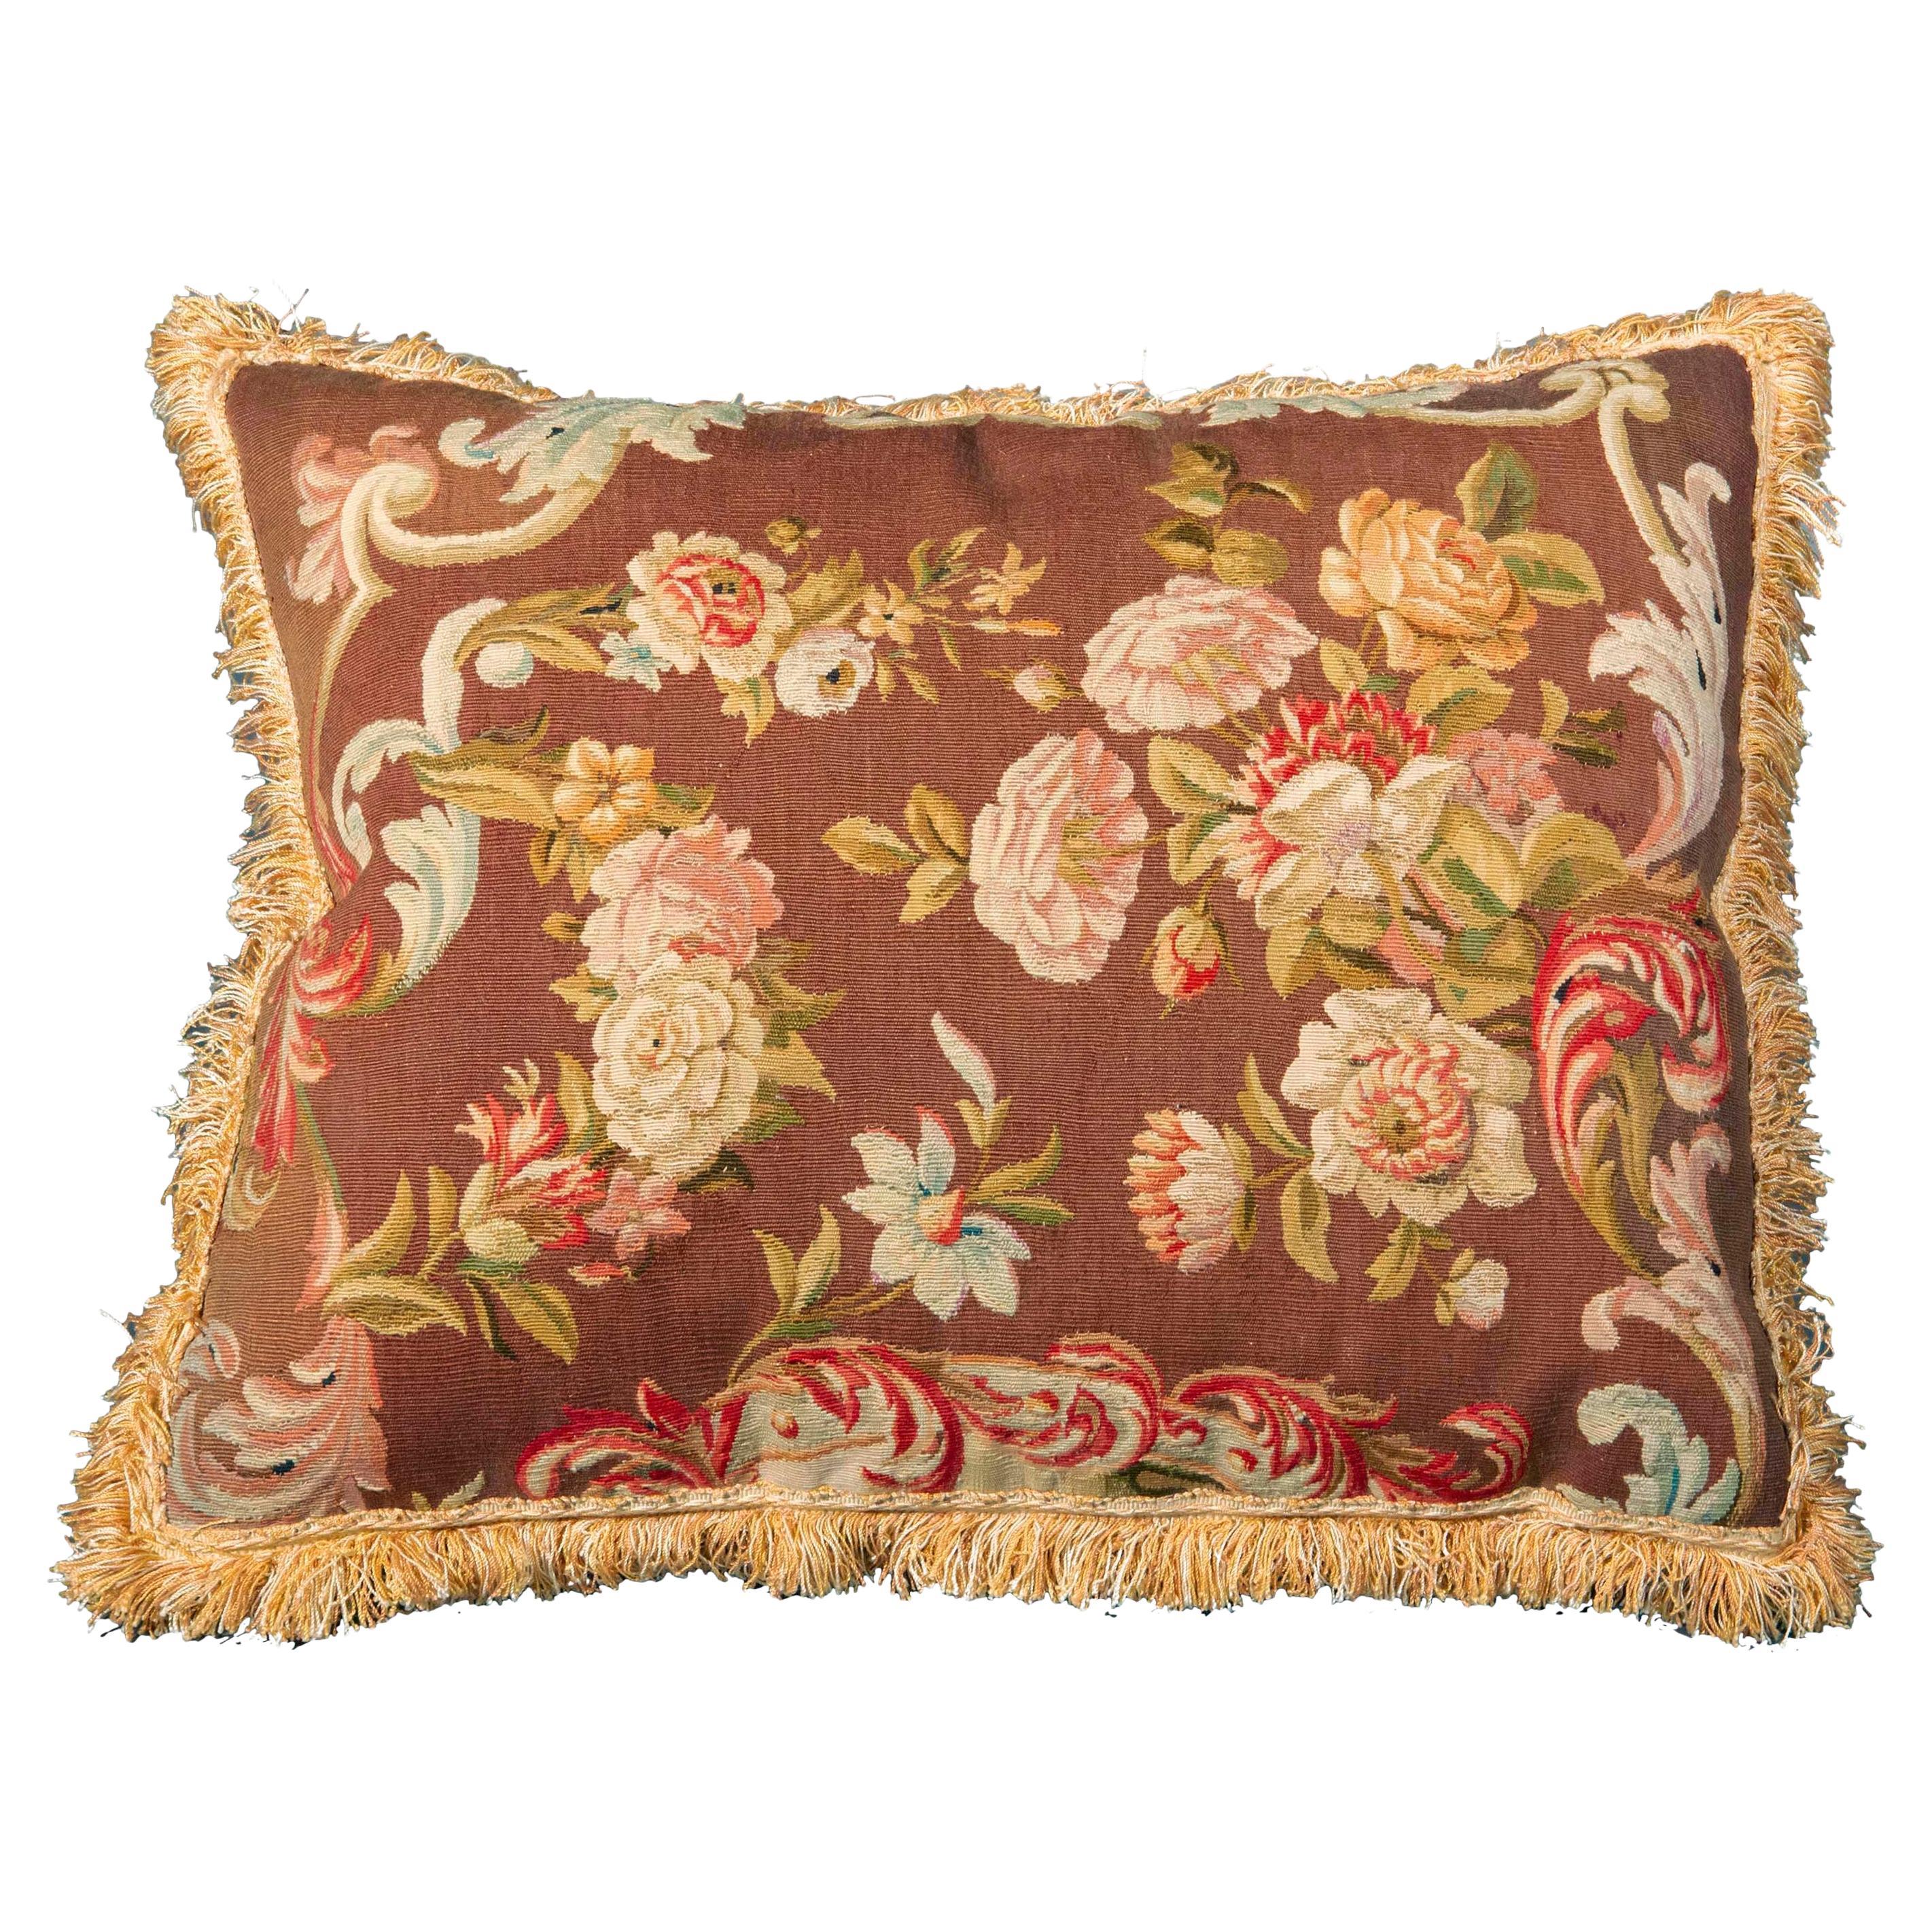 Antique Tapestry Pillow or Cushion, 18th Century